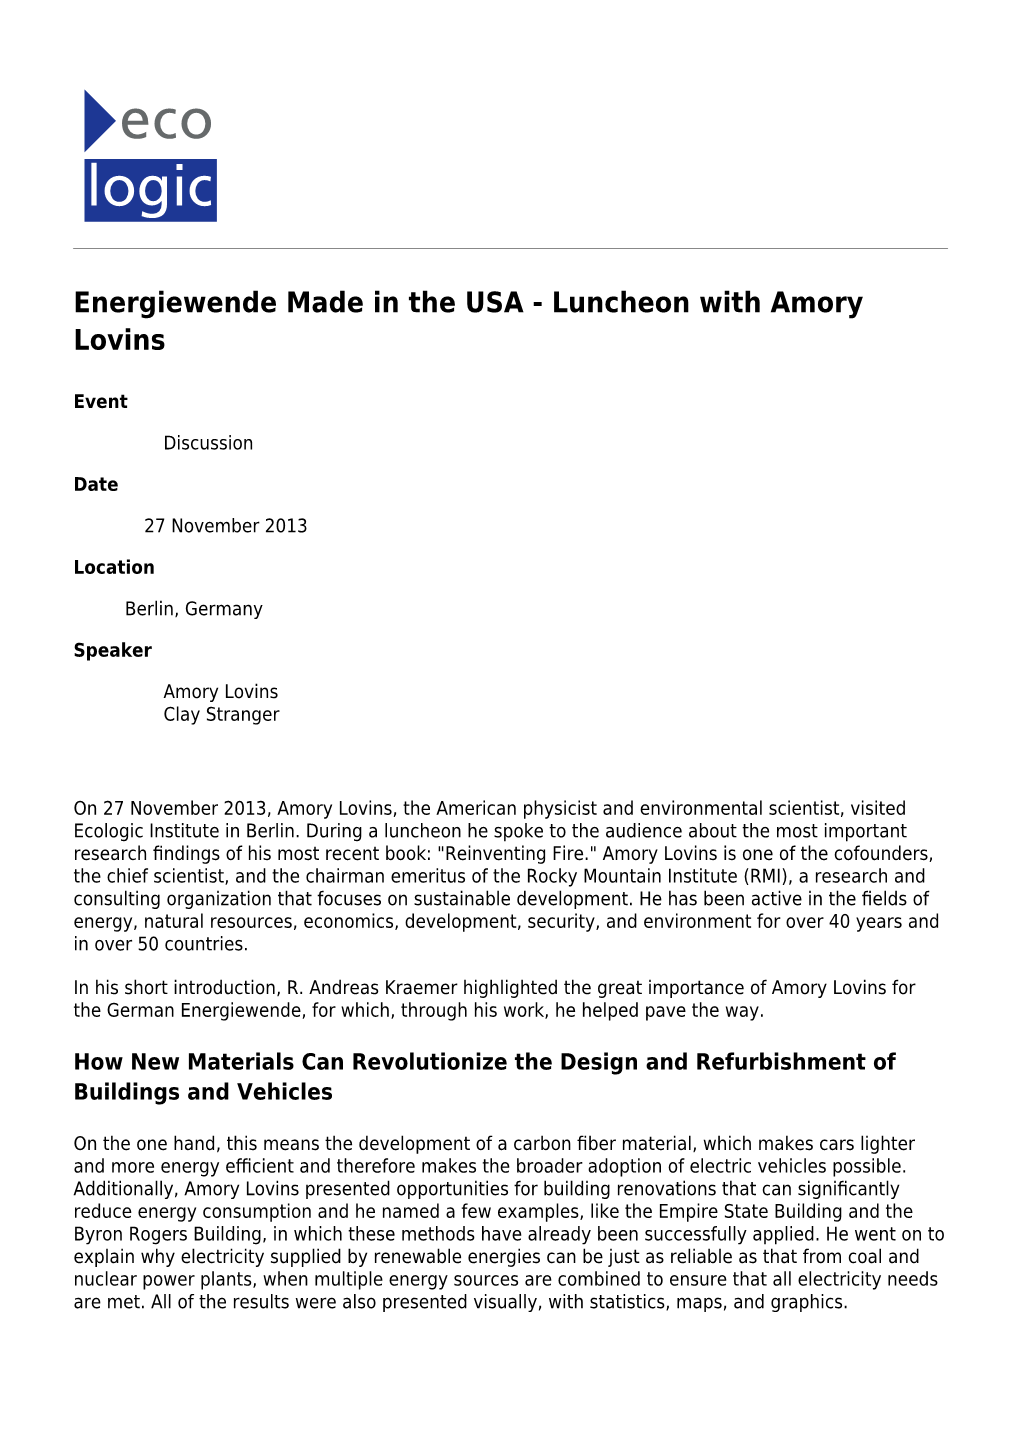 Energiewende Made in the USA - Luncheon with Amory Lovins